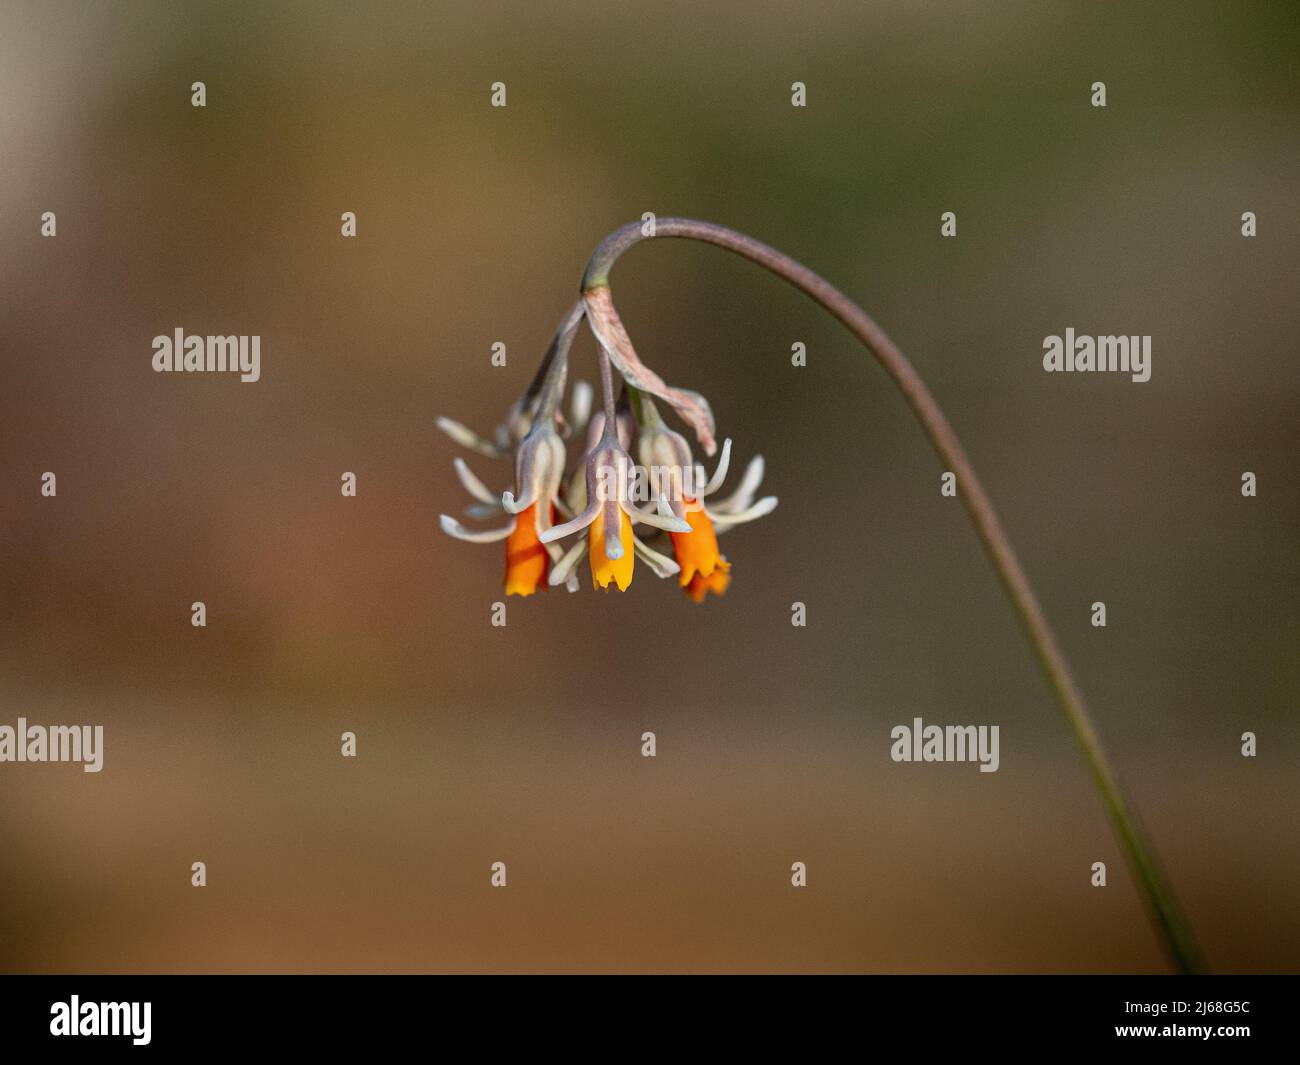 A close up of the orange and cream flowers of Tulbaghia capensis against an out of focus background Stock Photo